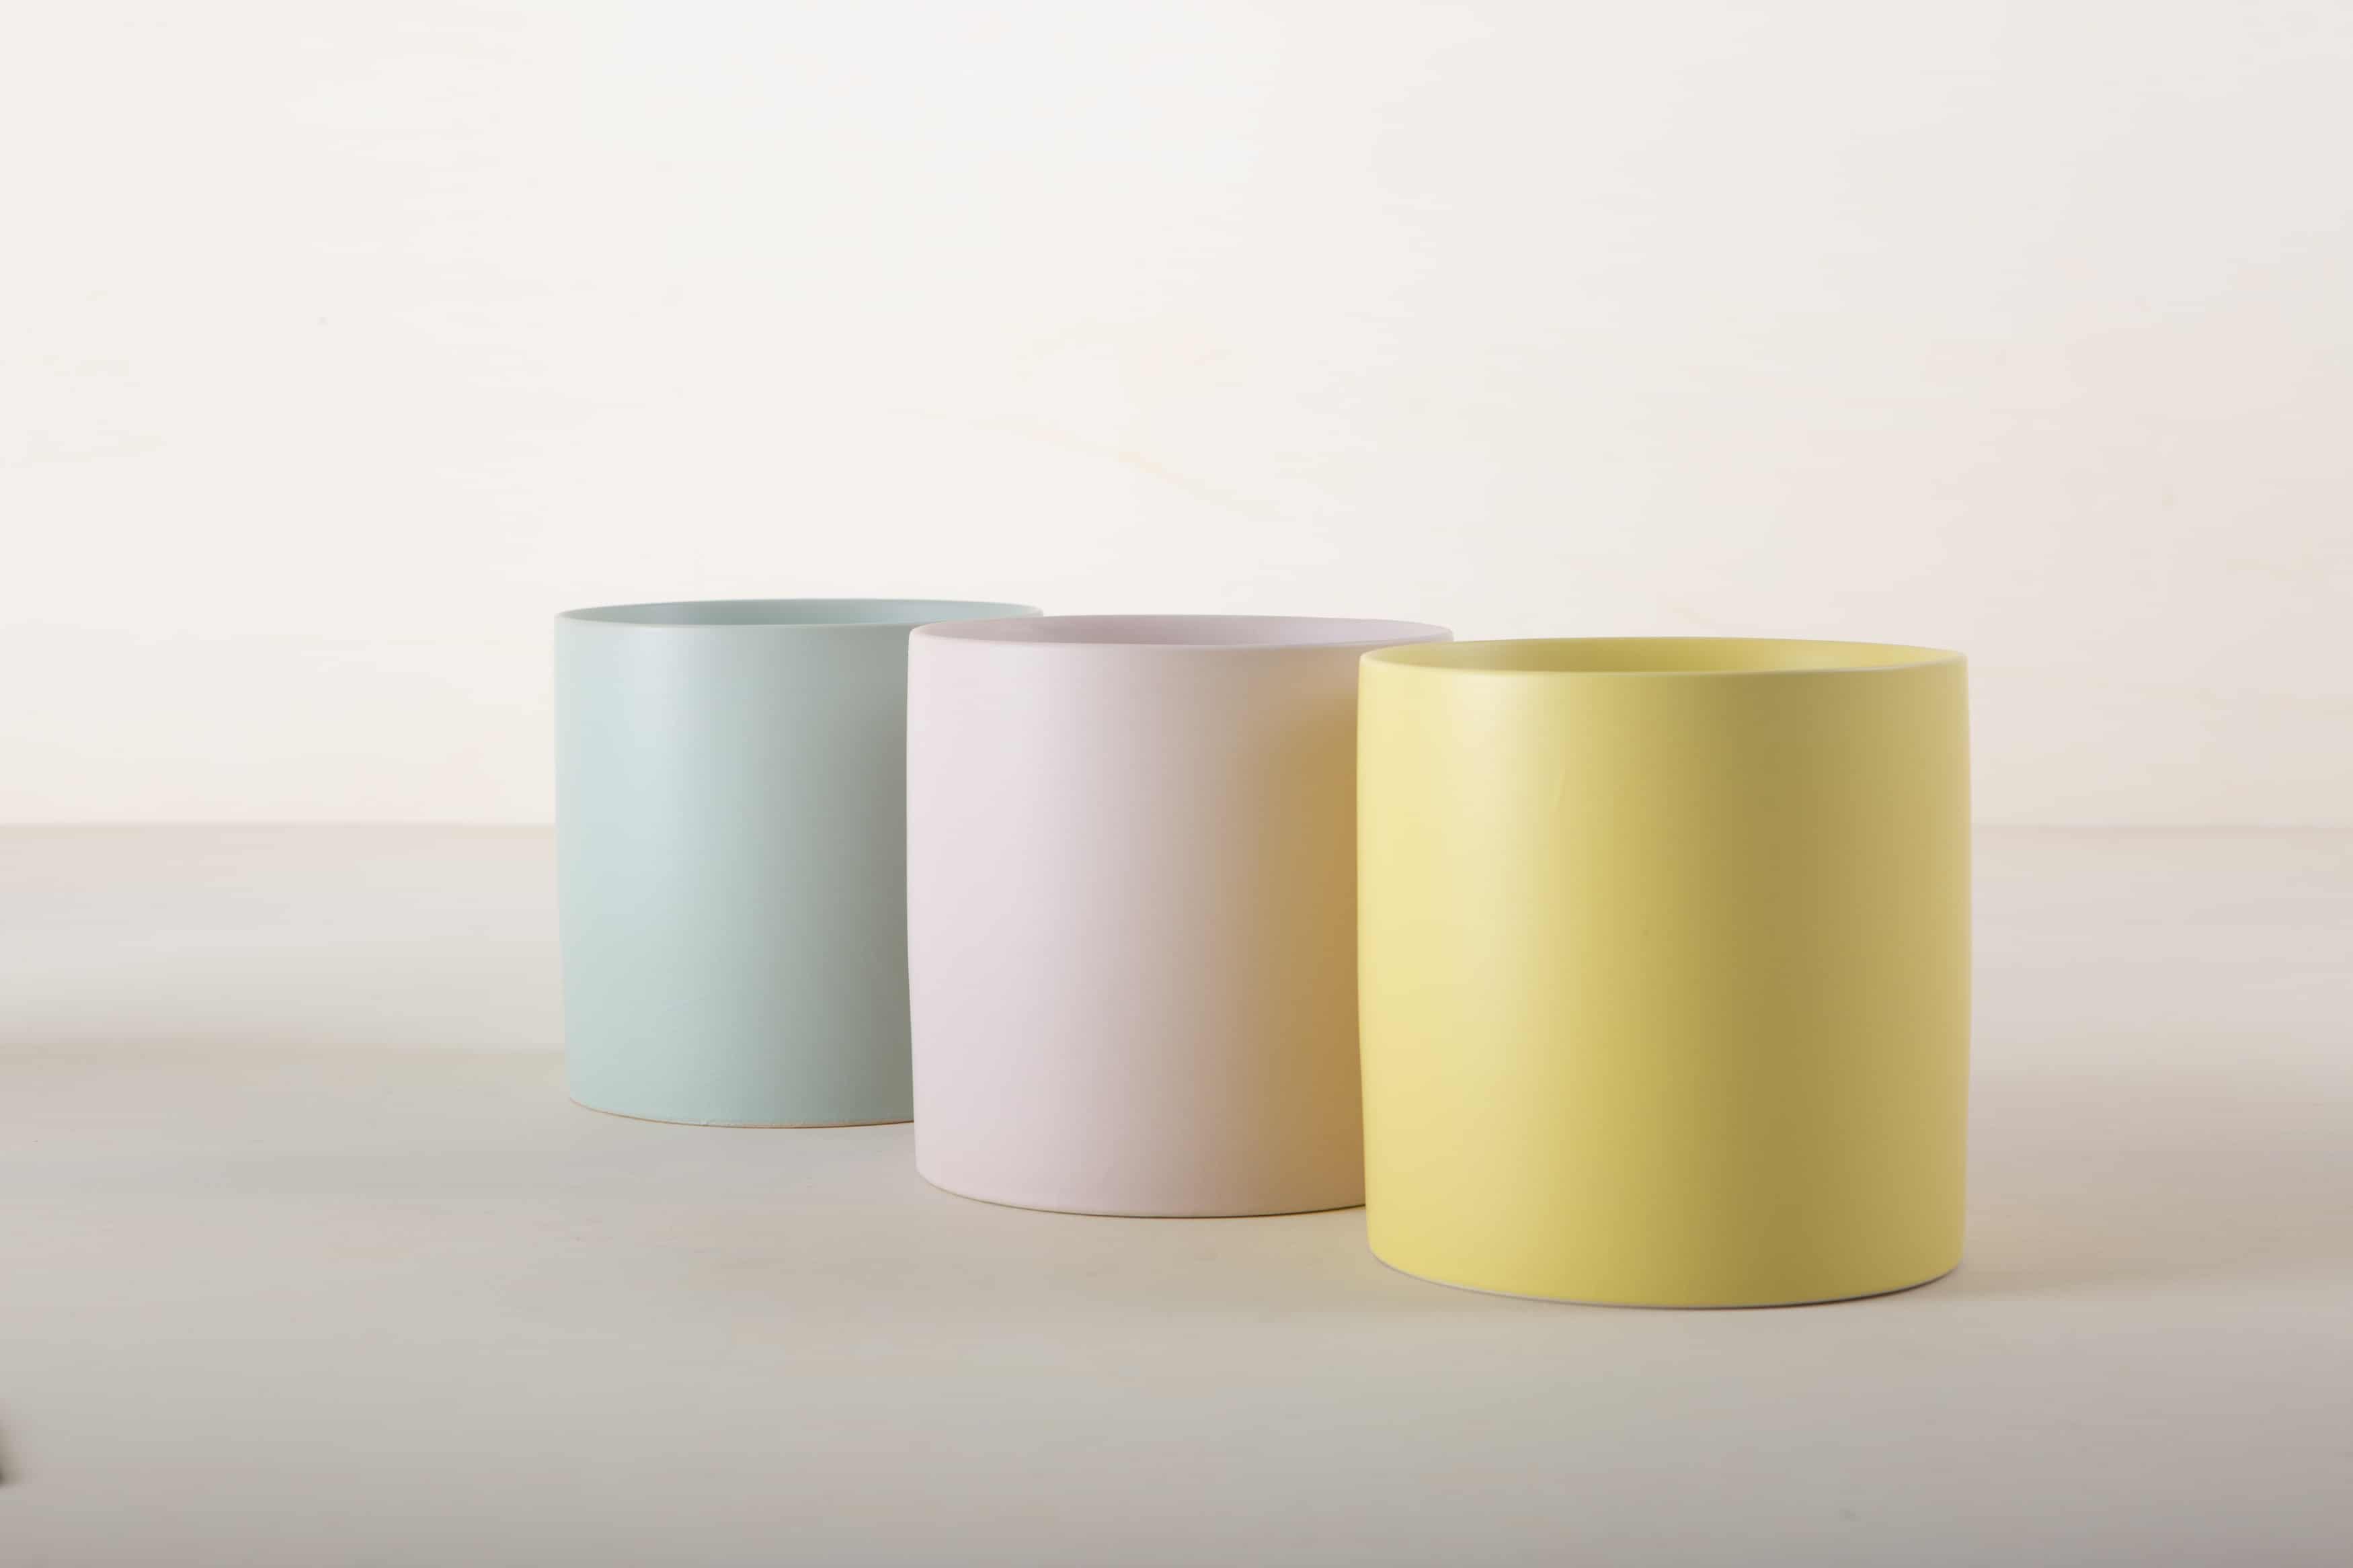  | No table is complete without flowers. If you prefer daisies or herbs in pots instead of cut flowers, our colourful ceramic pots are a great option for your decoration. They come in three cheerful pastel colours and harmonise perfectly with all the great flower colours while adding beautiful splashes of colour to the table. | 